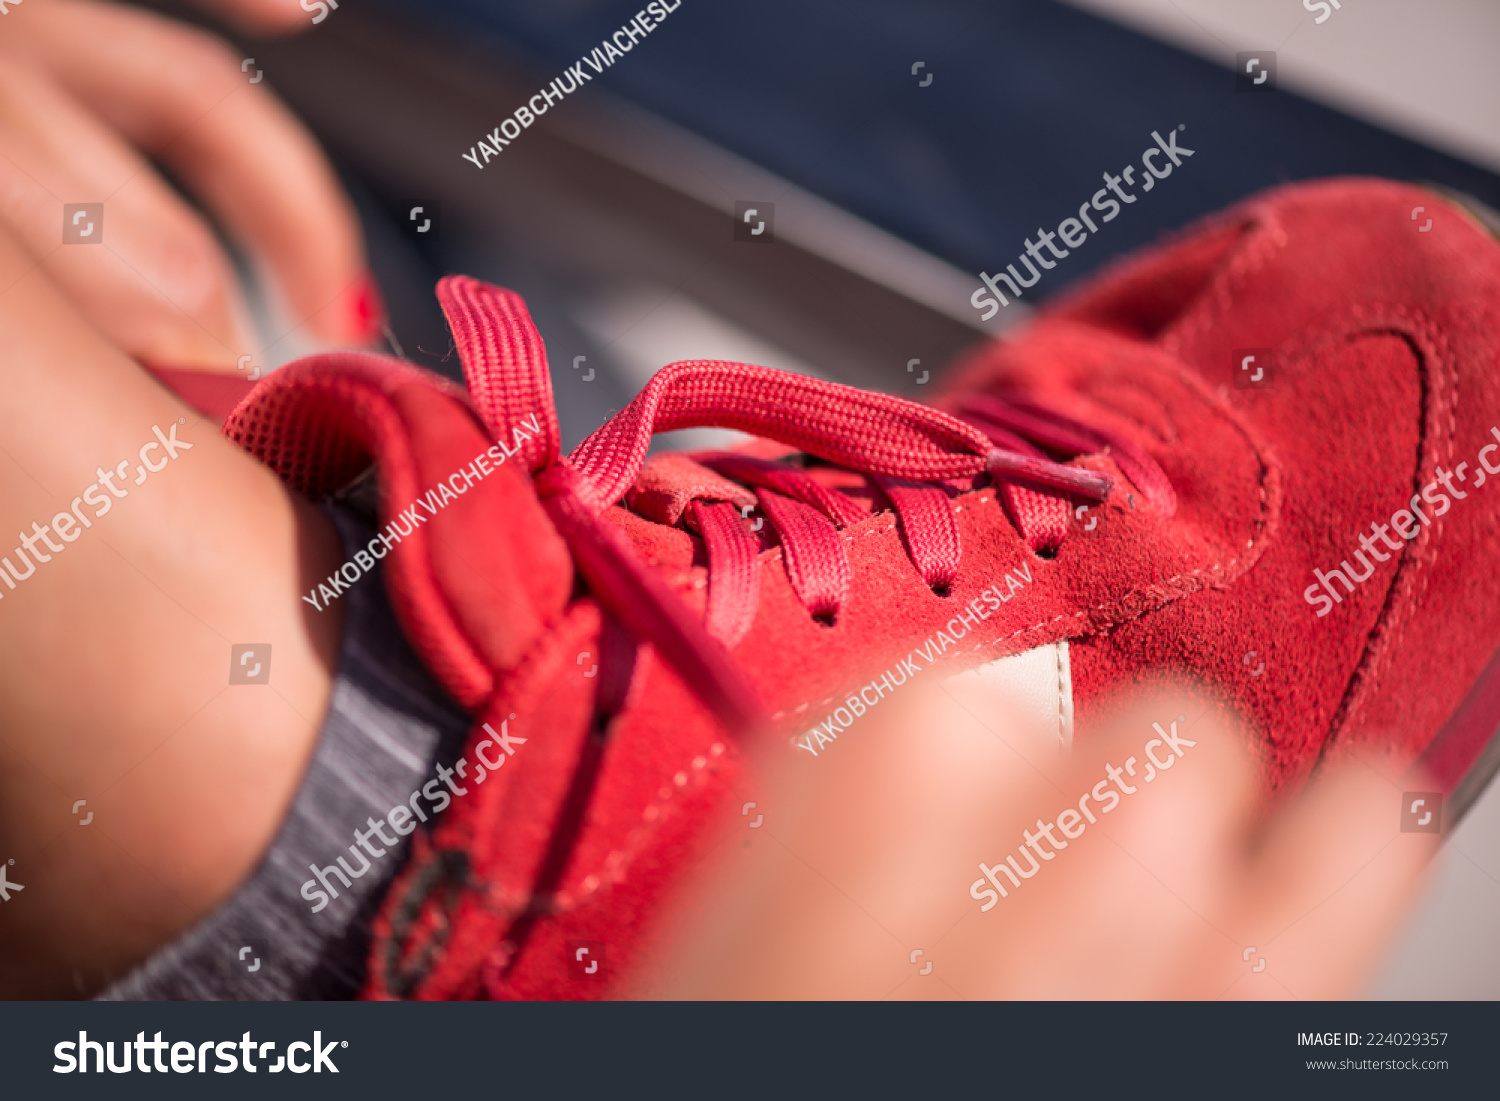 Selective focus on the legs of the woman wearing red jogging shoes putting right at it #224029357